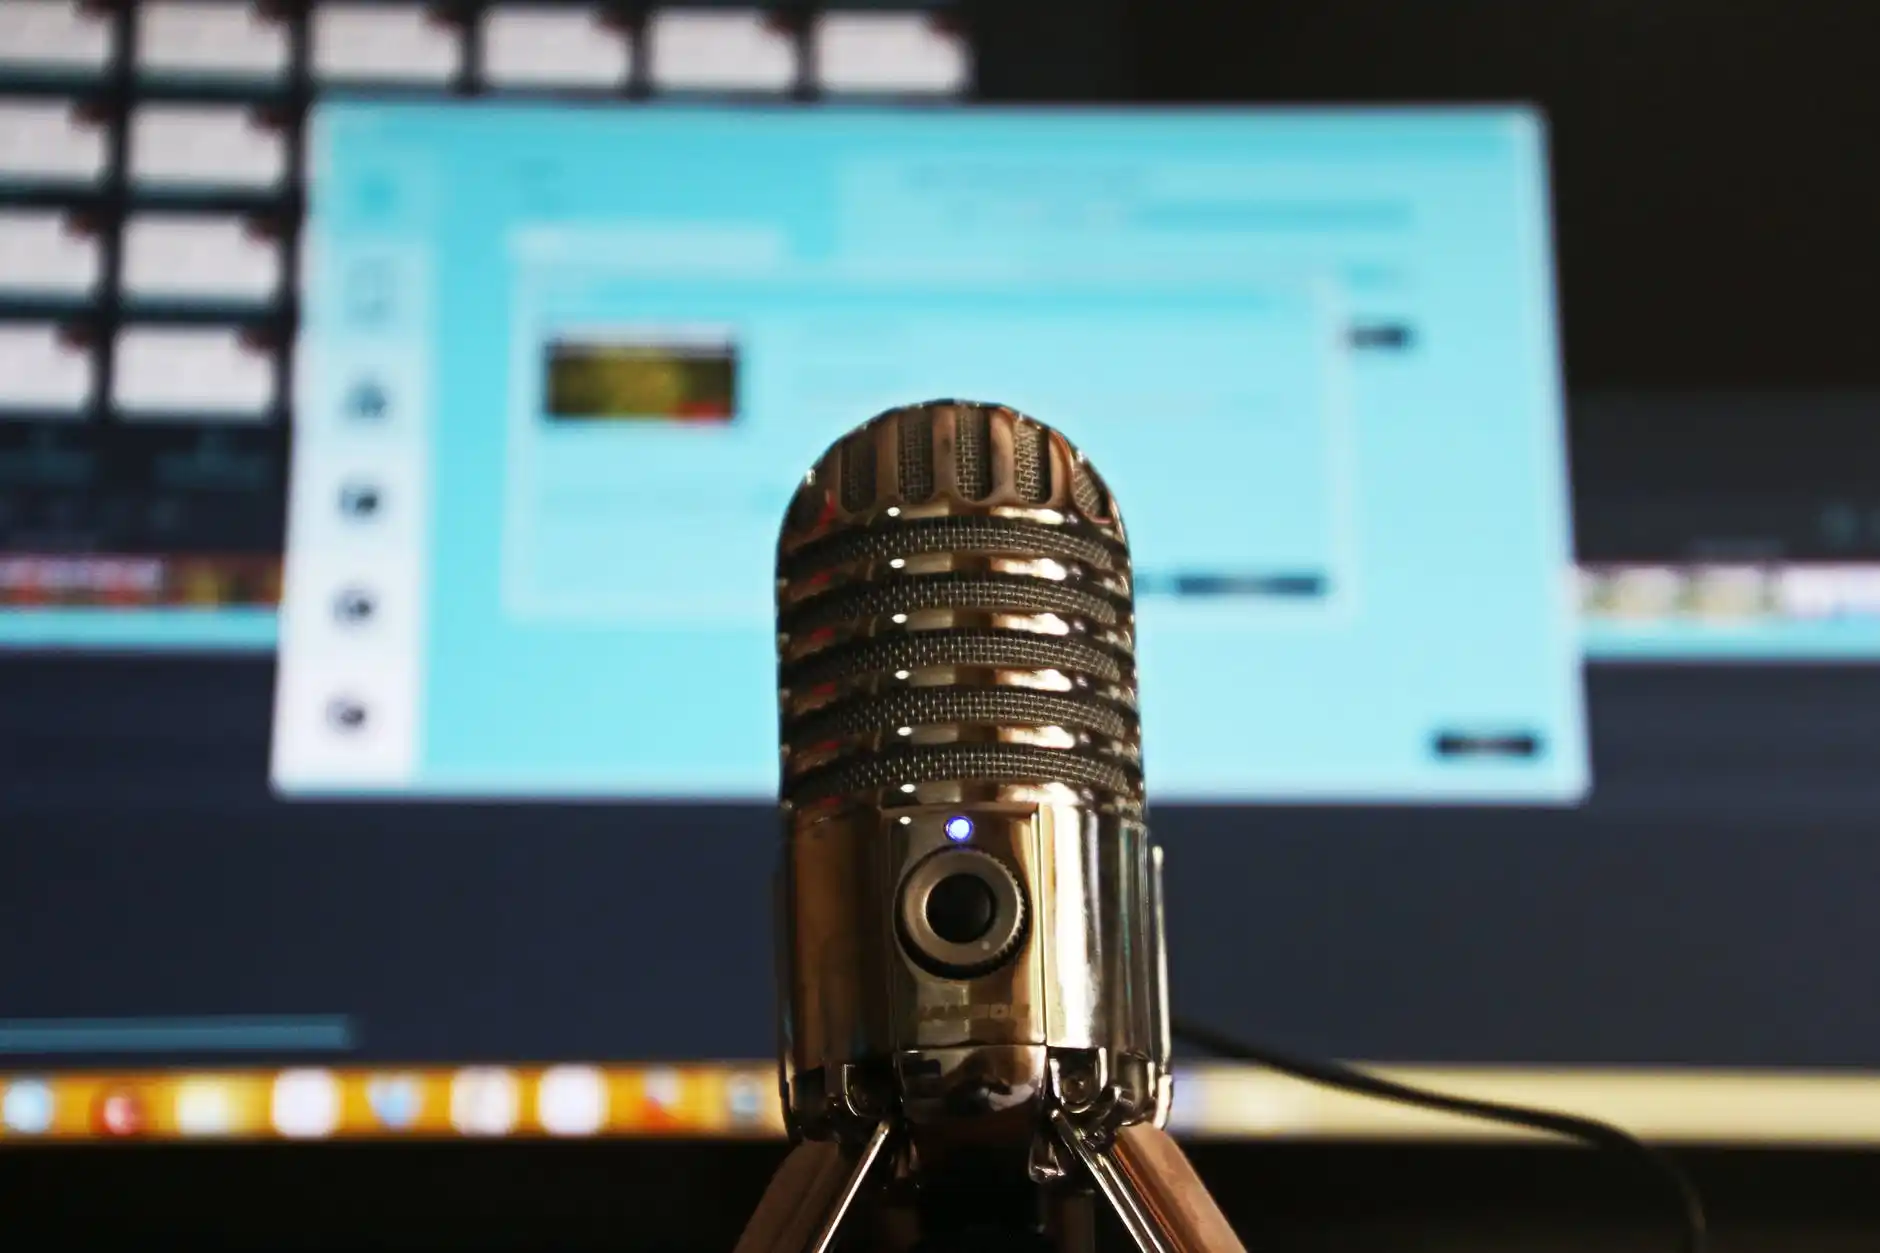 photo of a microphone with built-in camera and lighting